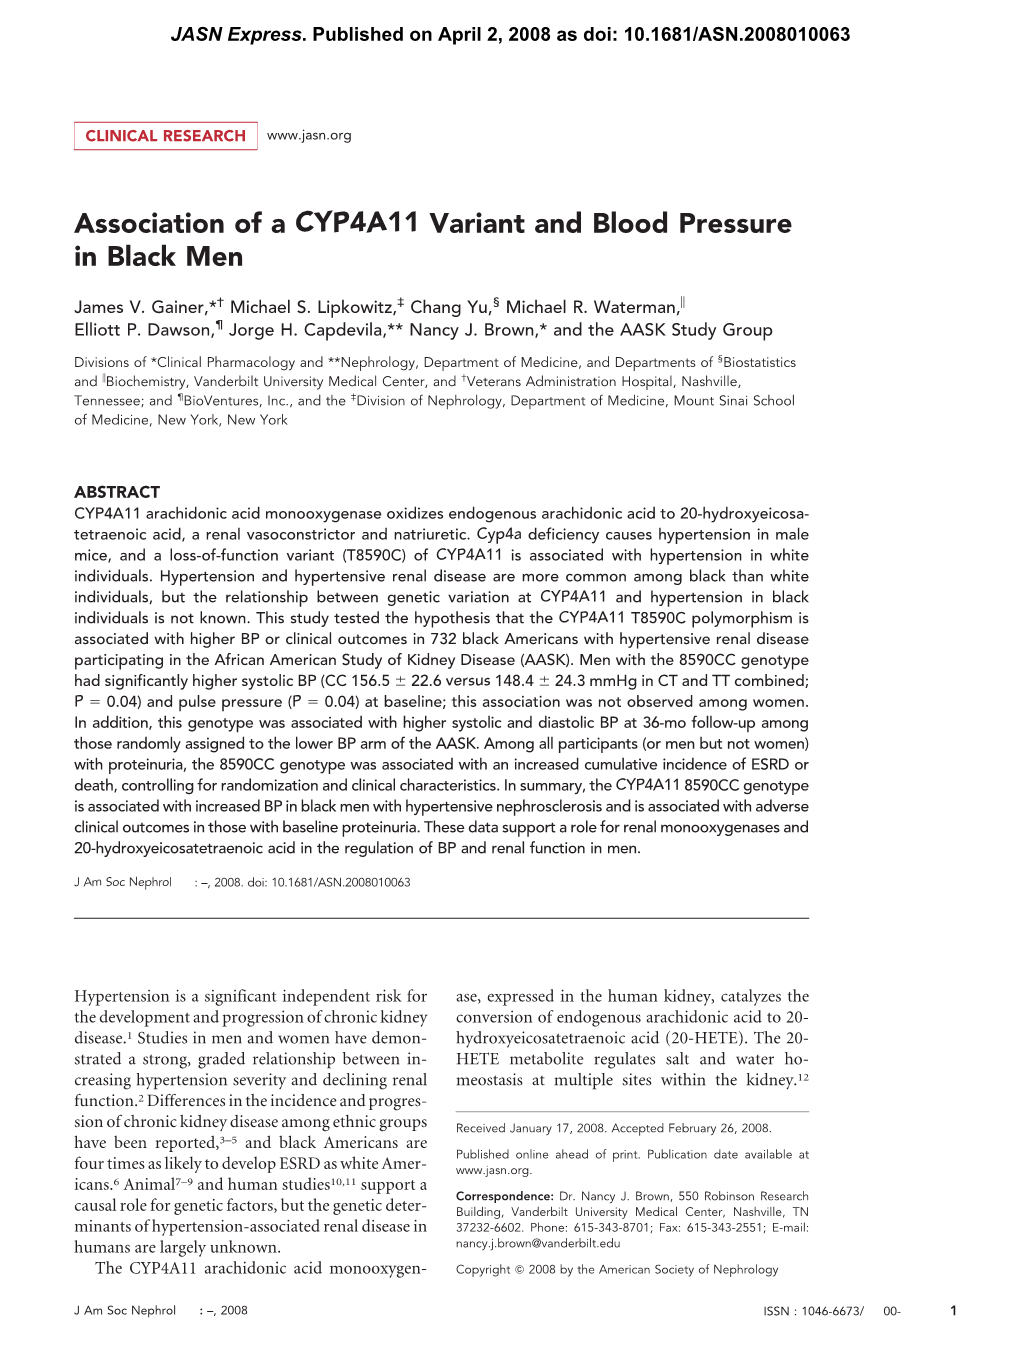 Association of a CYP4A11 Variant and Blood Pressure in Black Men